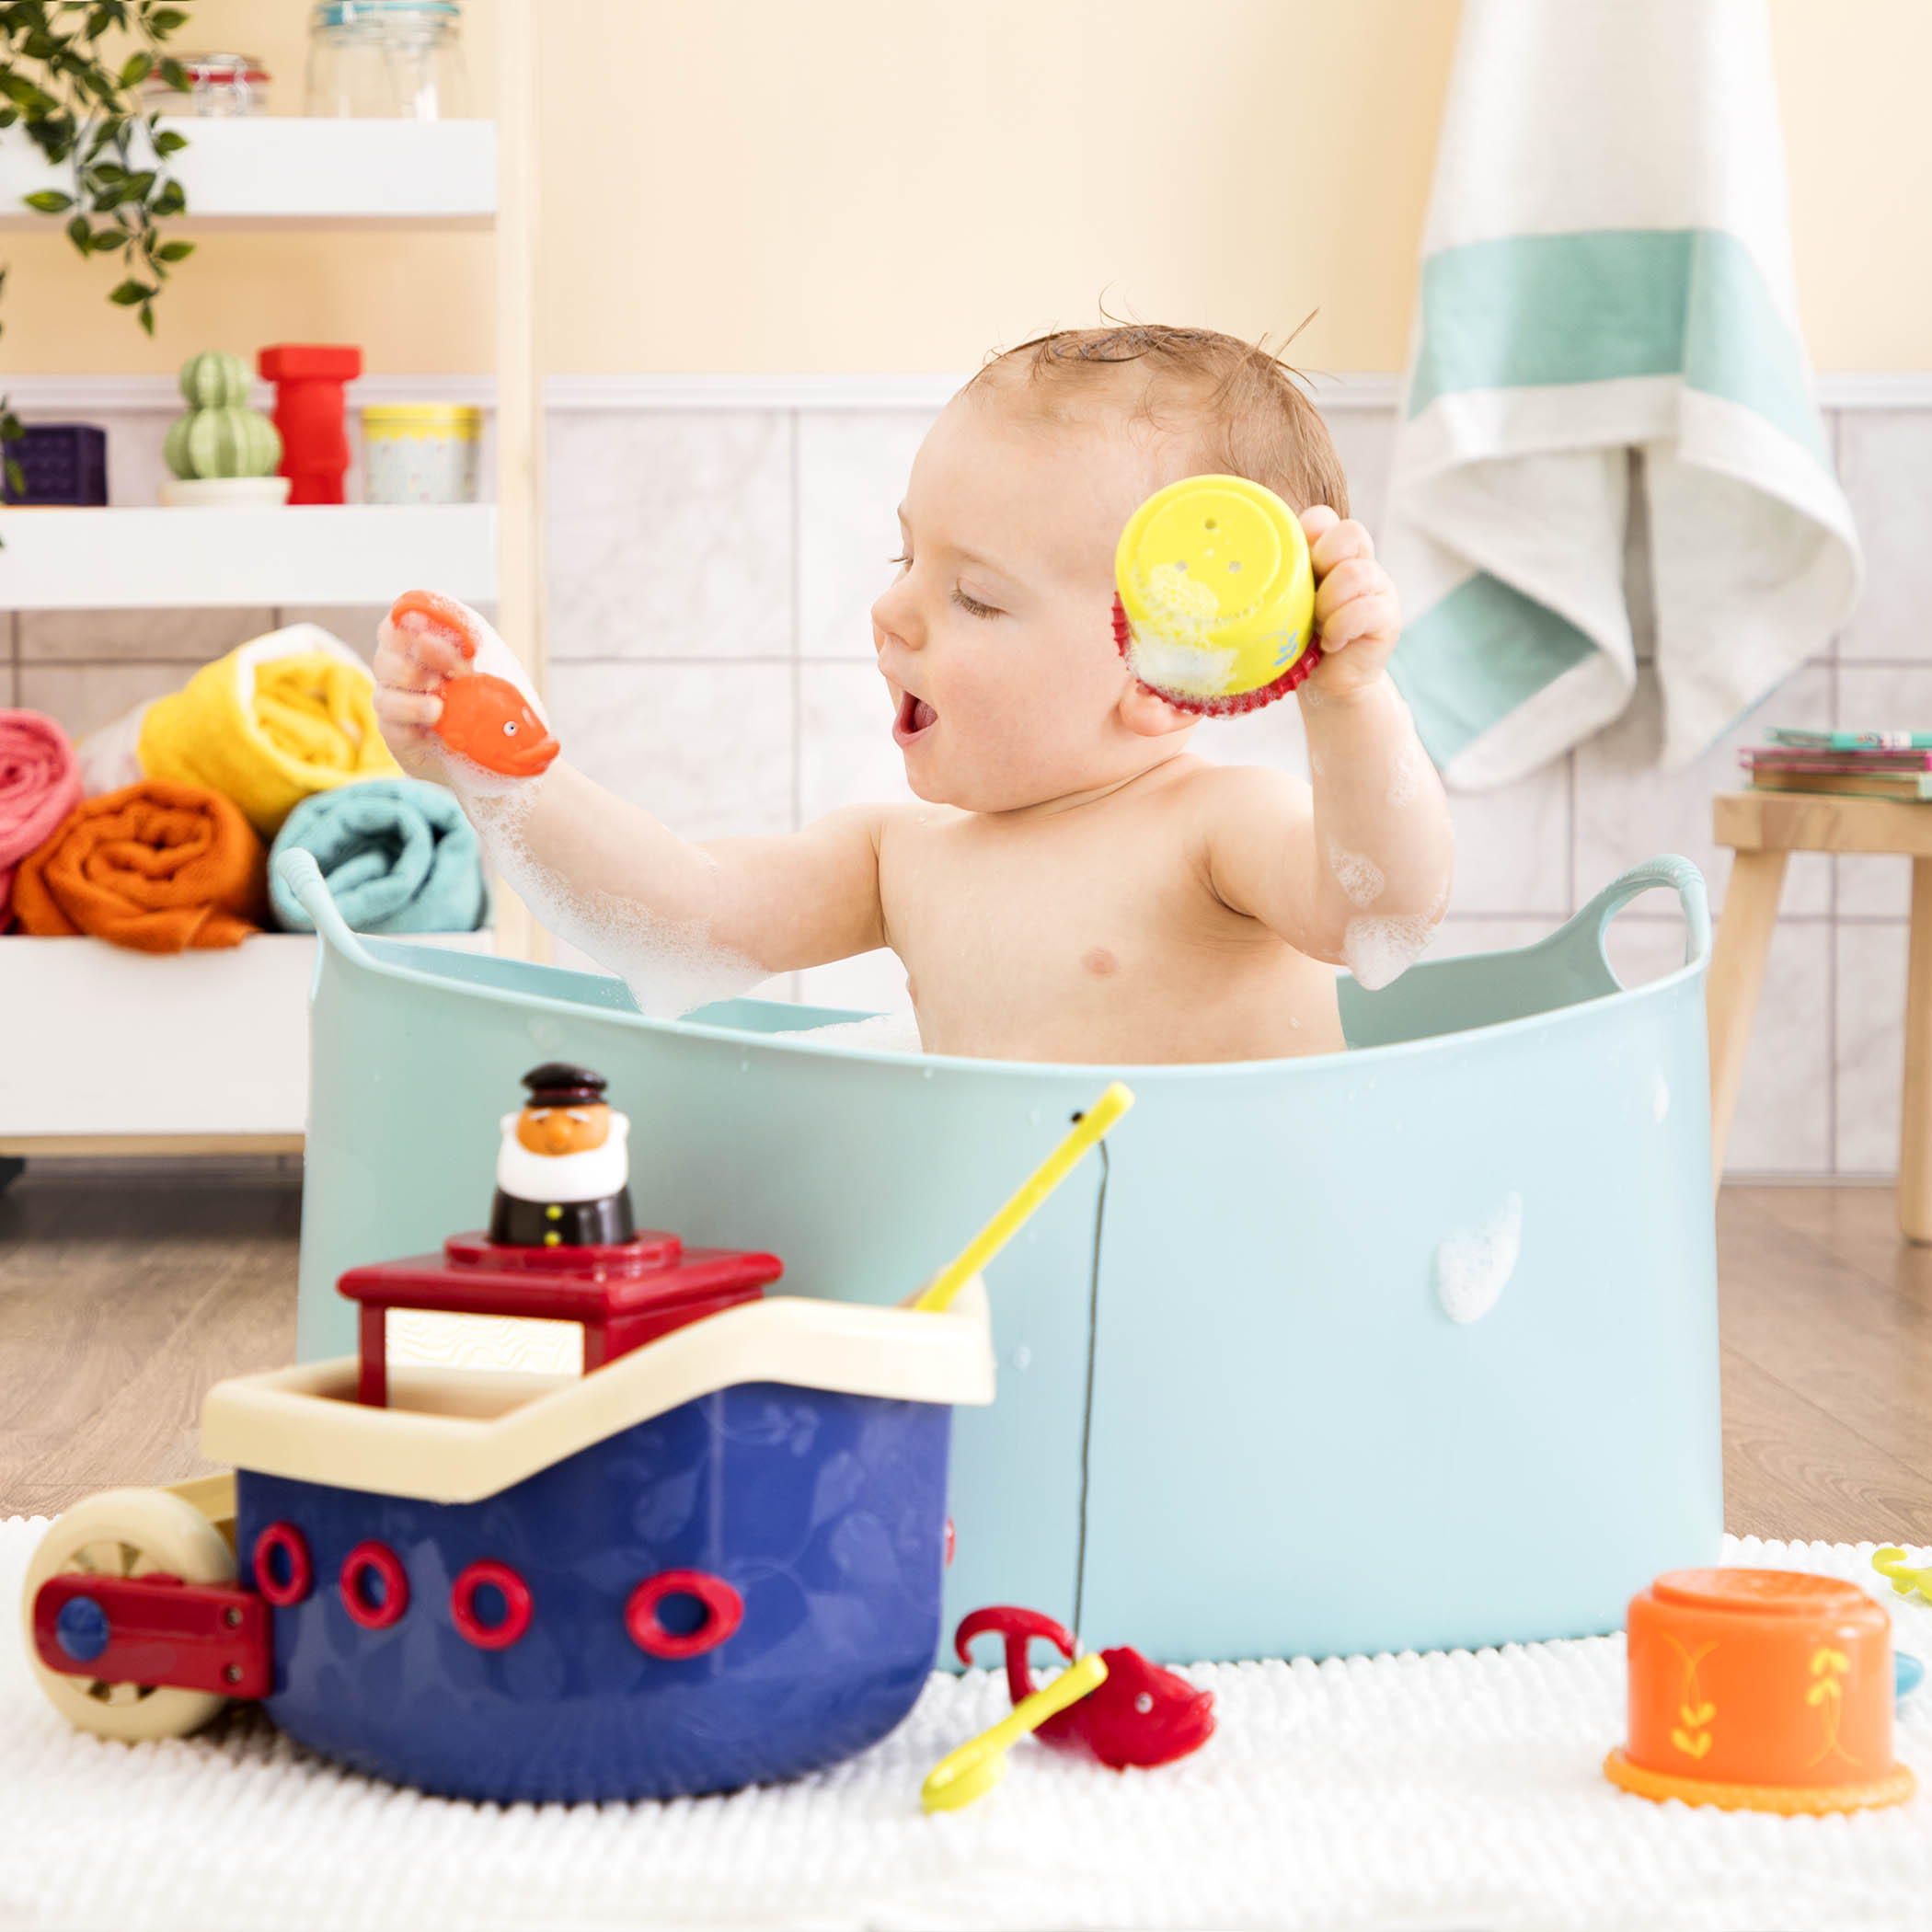 10 Perfect Bath Toys for Older Kids to Keep It FUN in the Tub